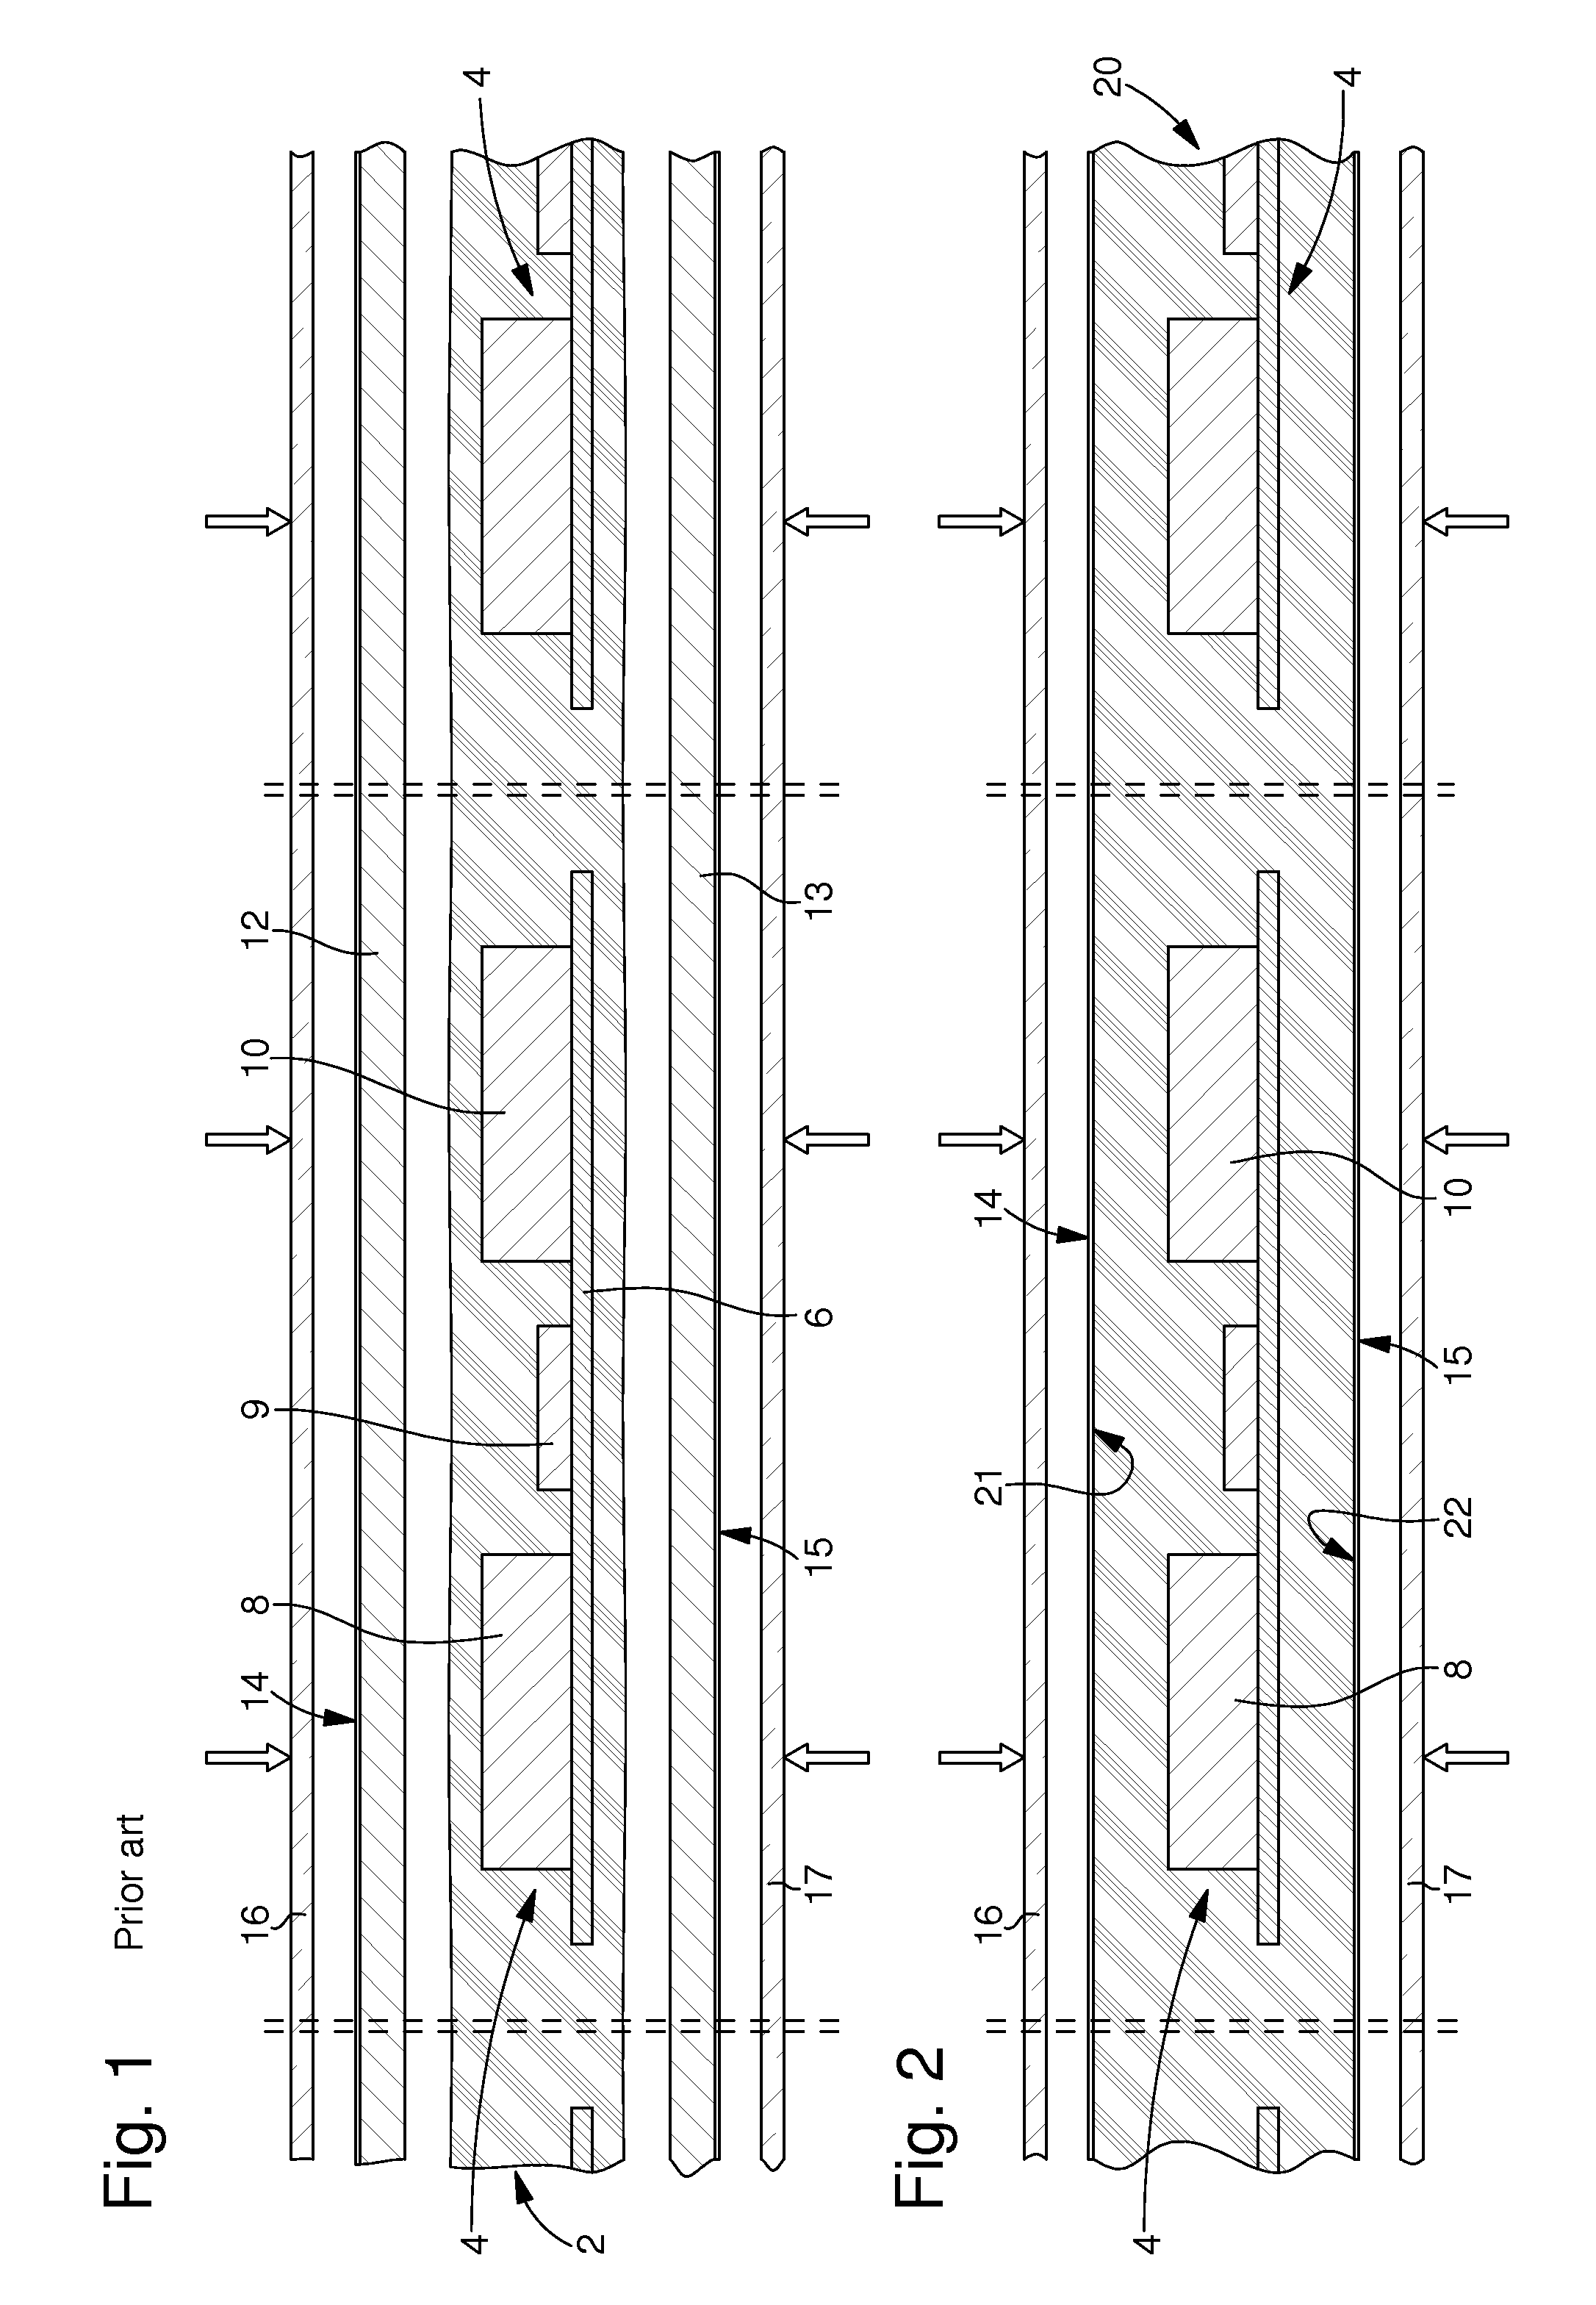 Method of fabricating electronic cards including at least one printed pattern